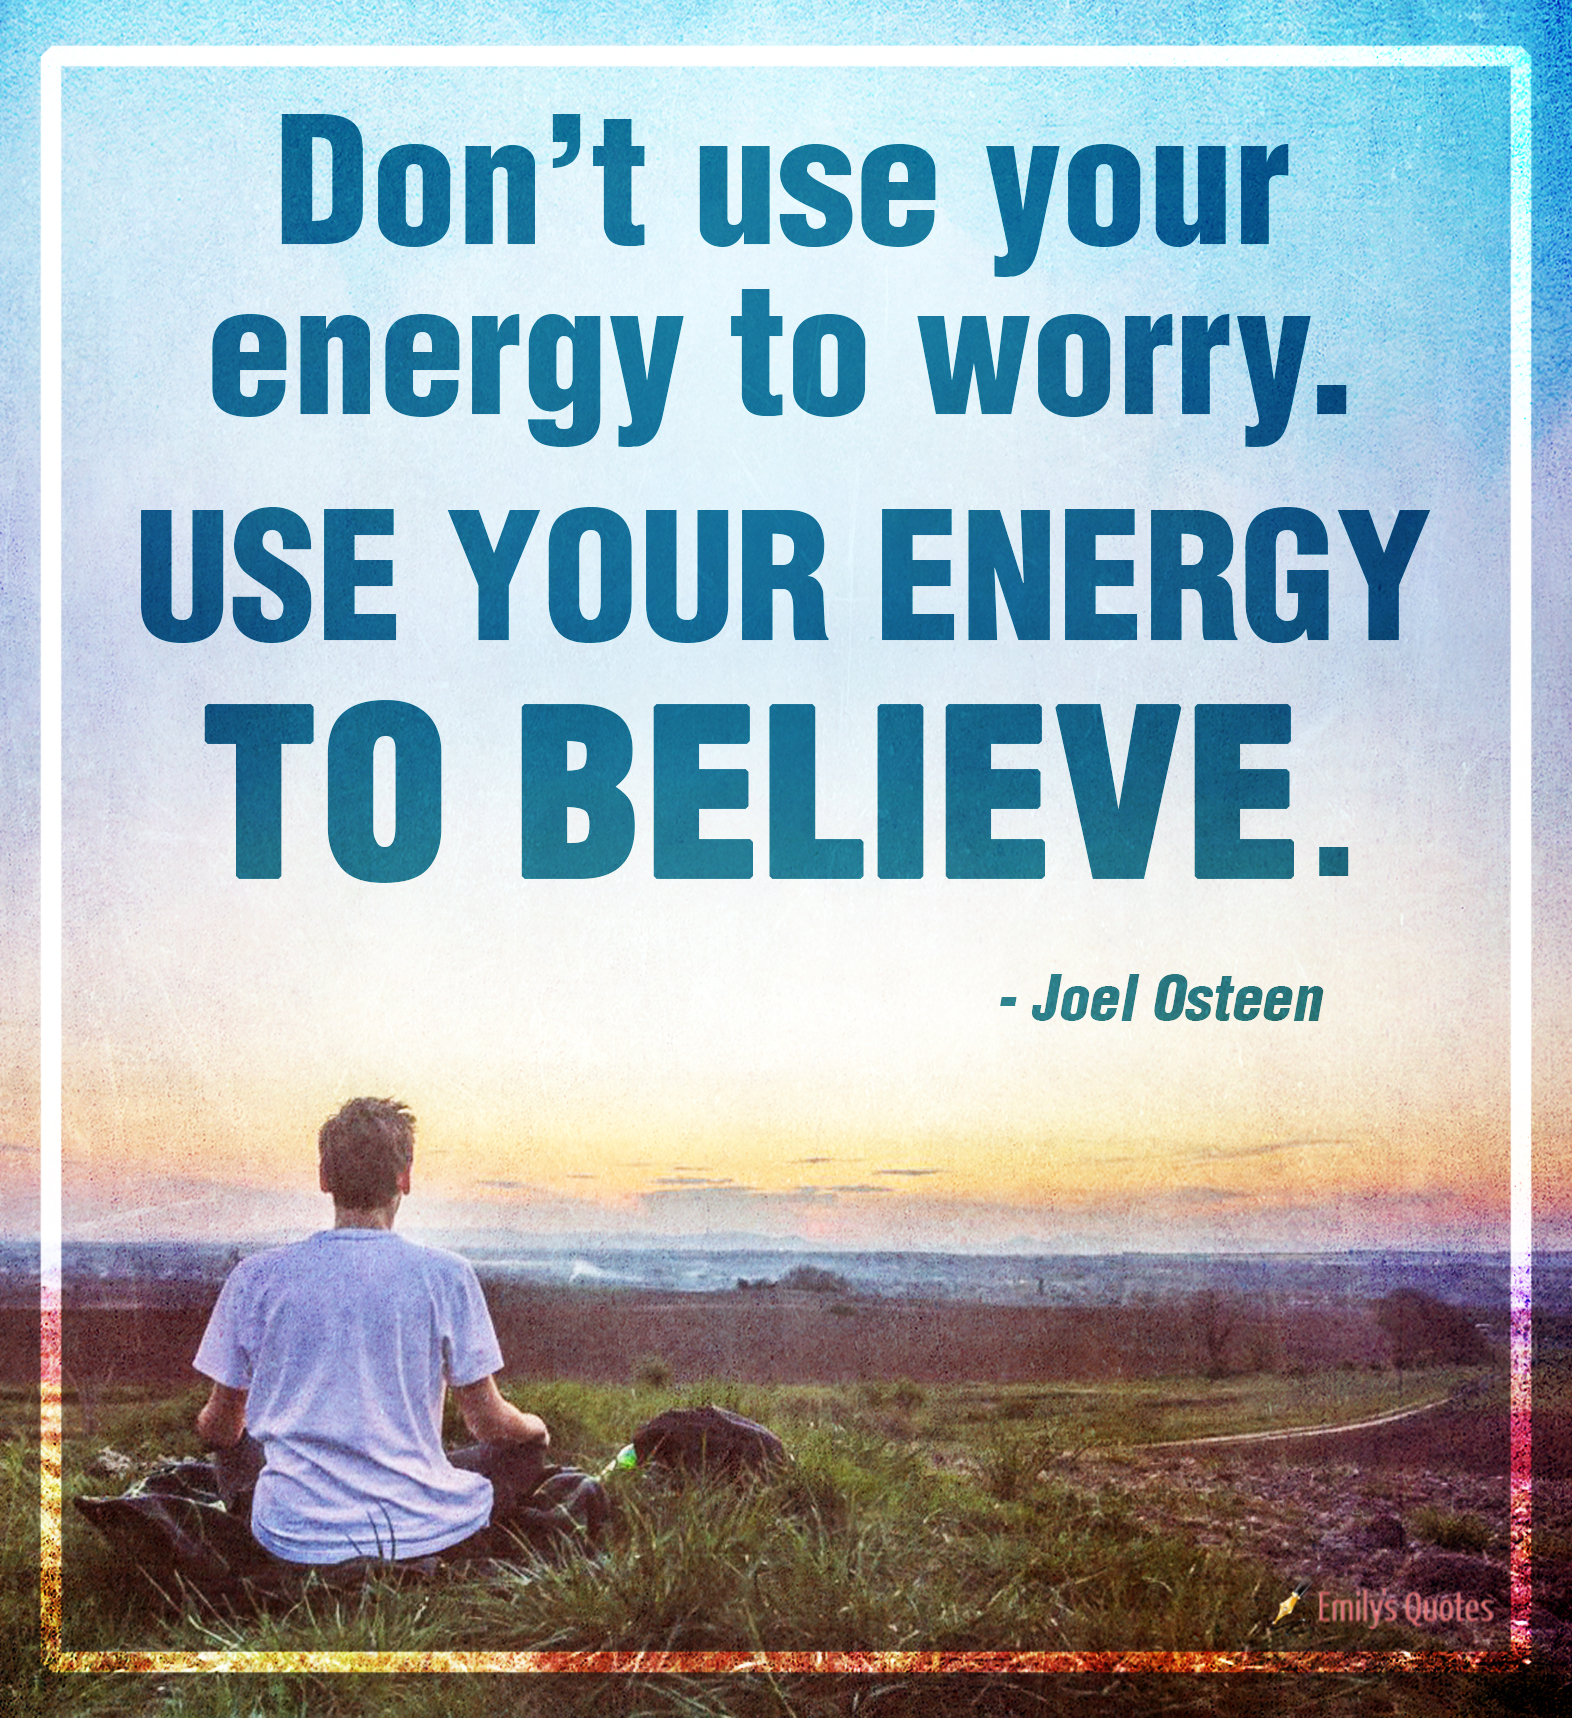 Quotes On Positive Energy - Cocharity